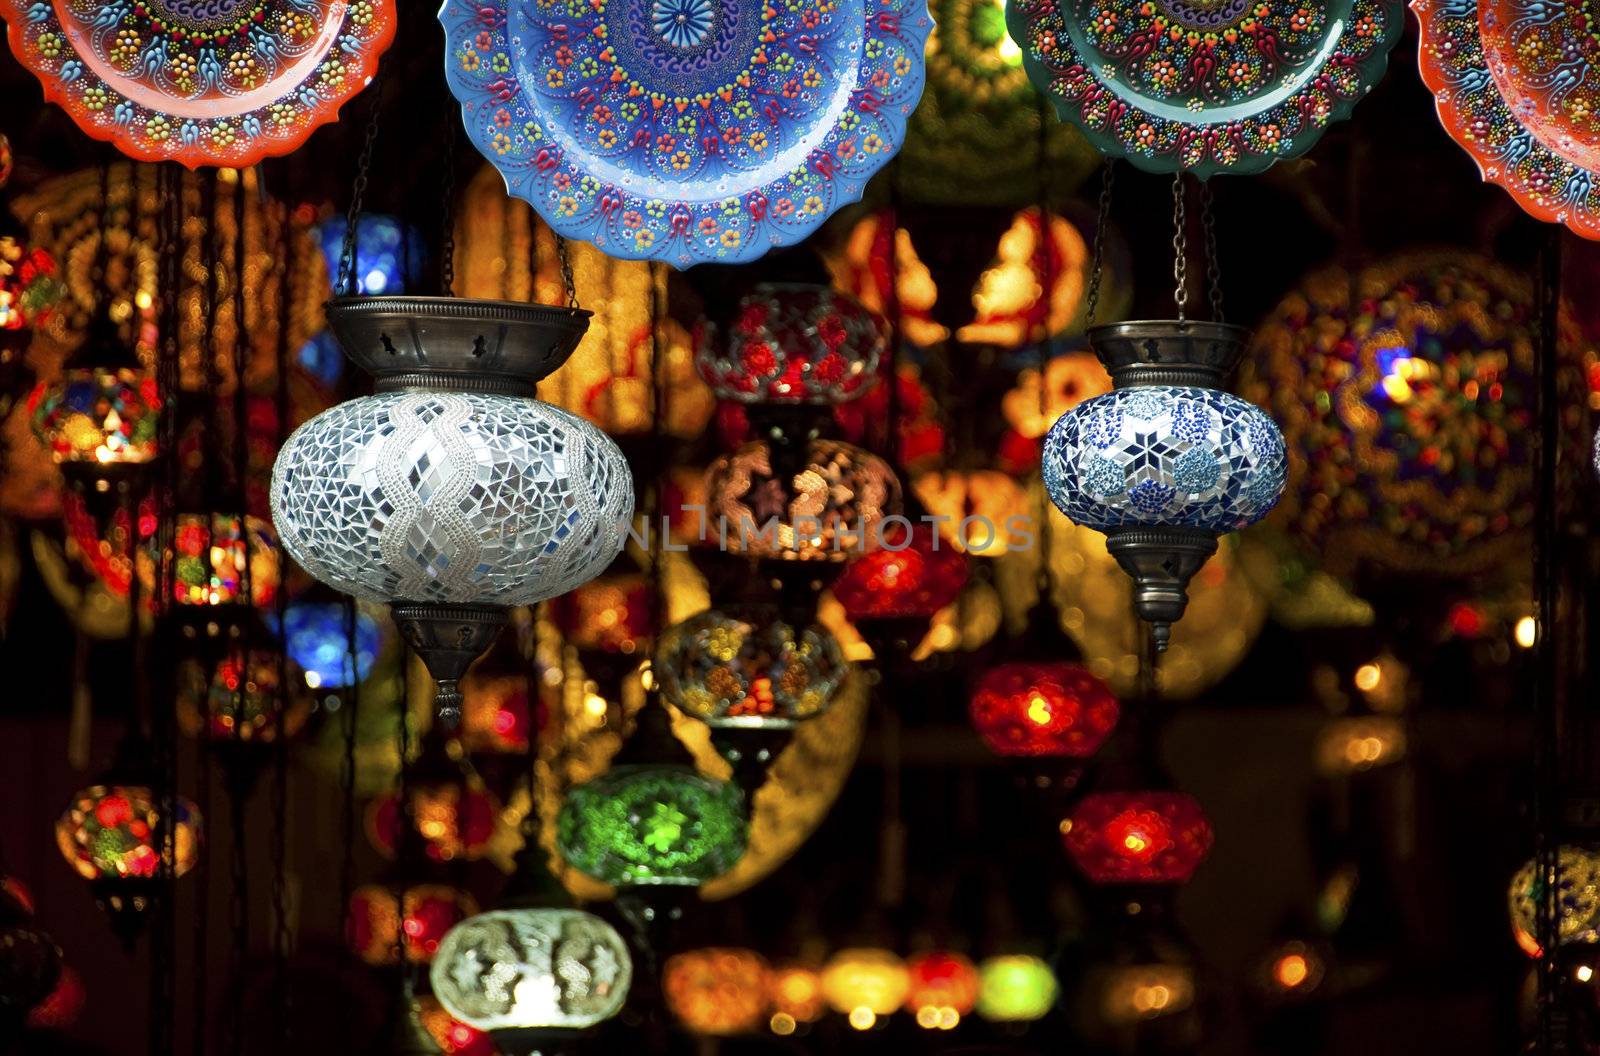 Colorful Arabic lantern and plates in a souk